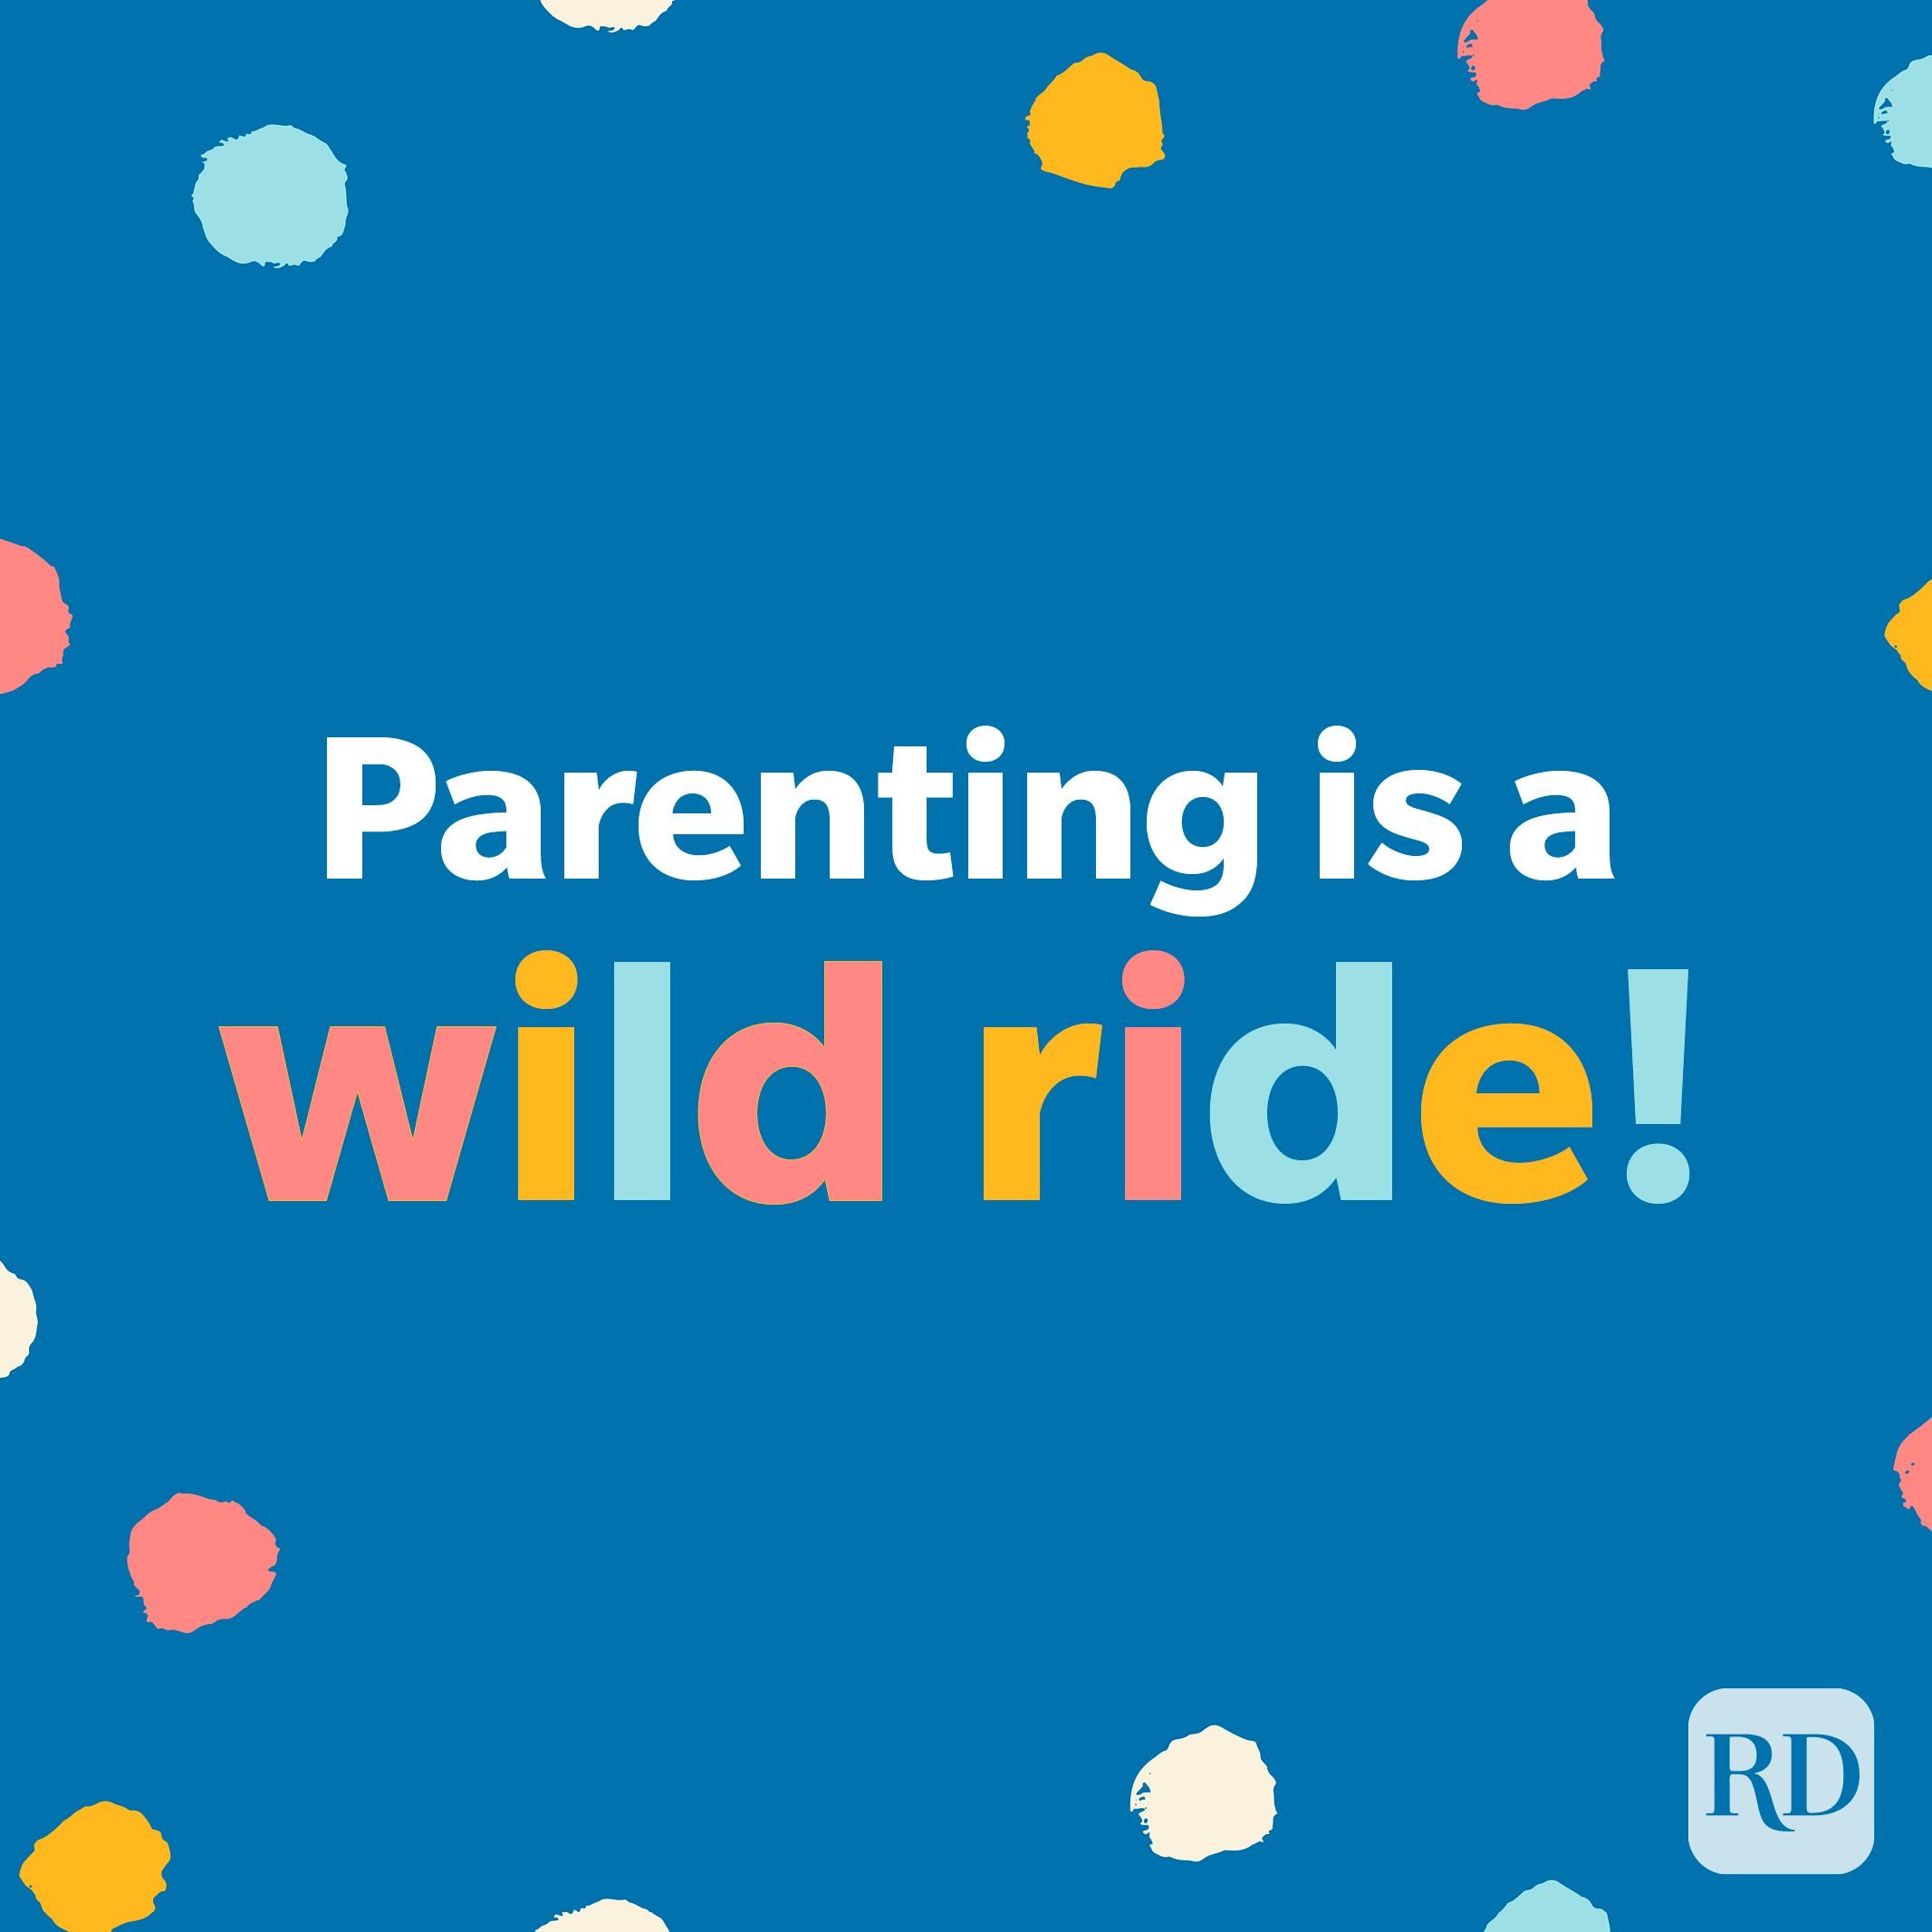 Parenting is a wild ride!